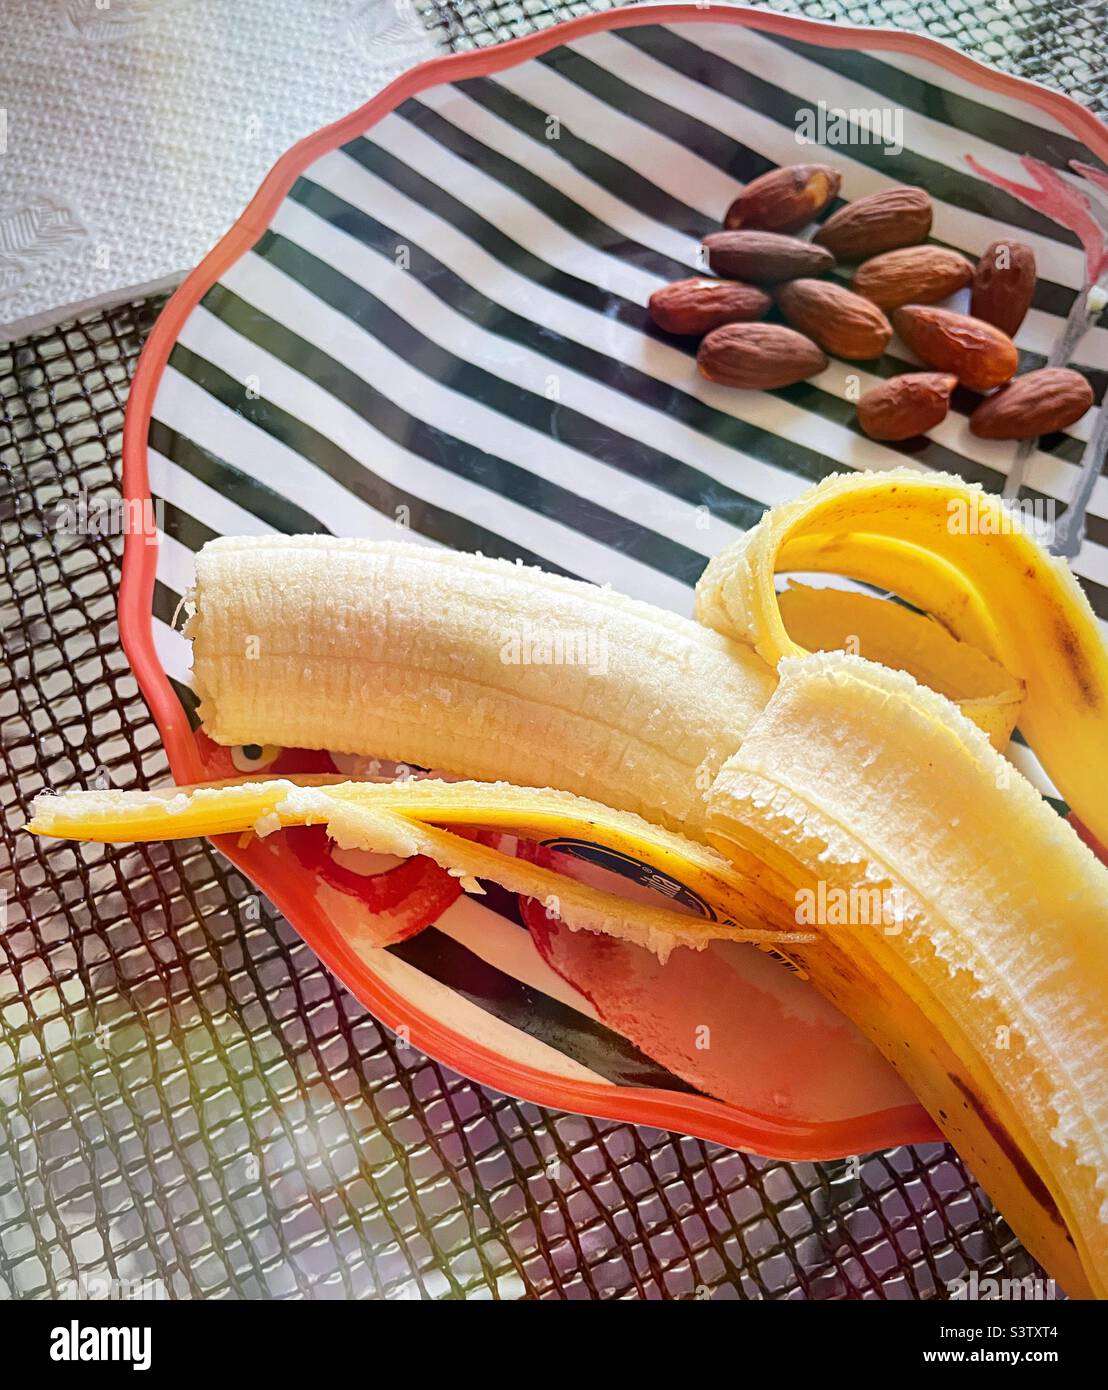 Close up of an afternoon snack of a fresh banana and almonds, 2022, USA Stock Photo